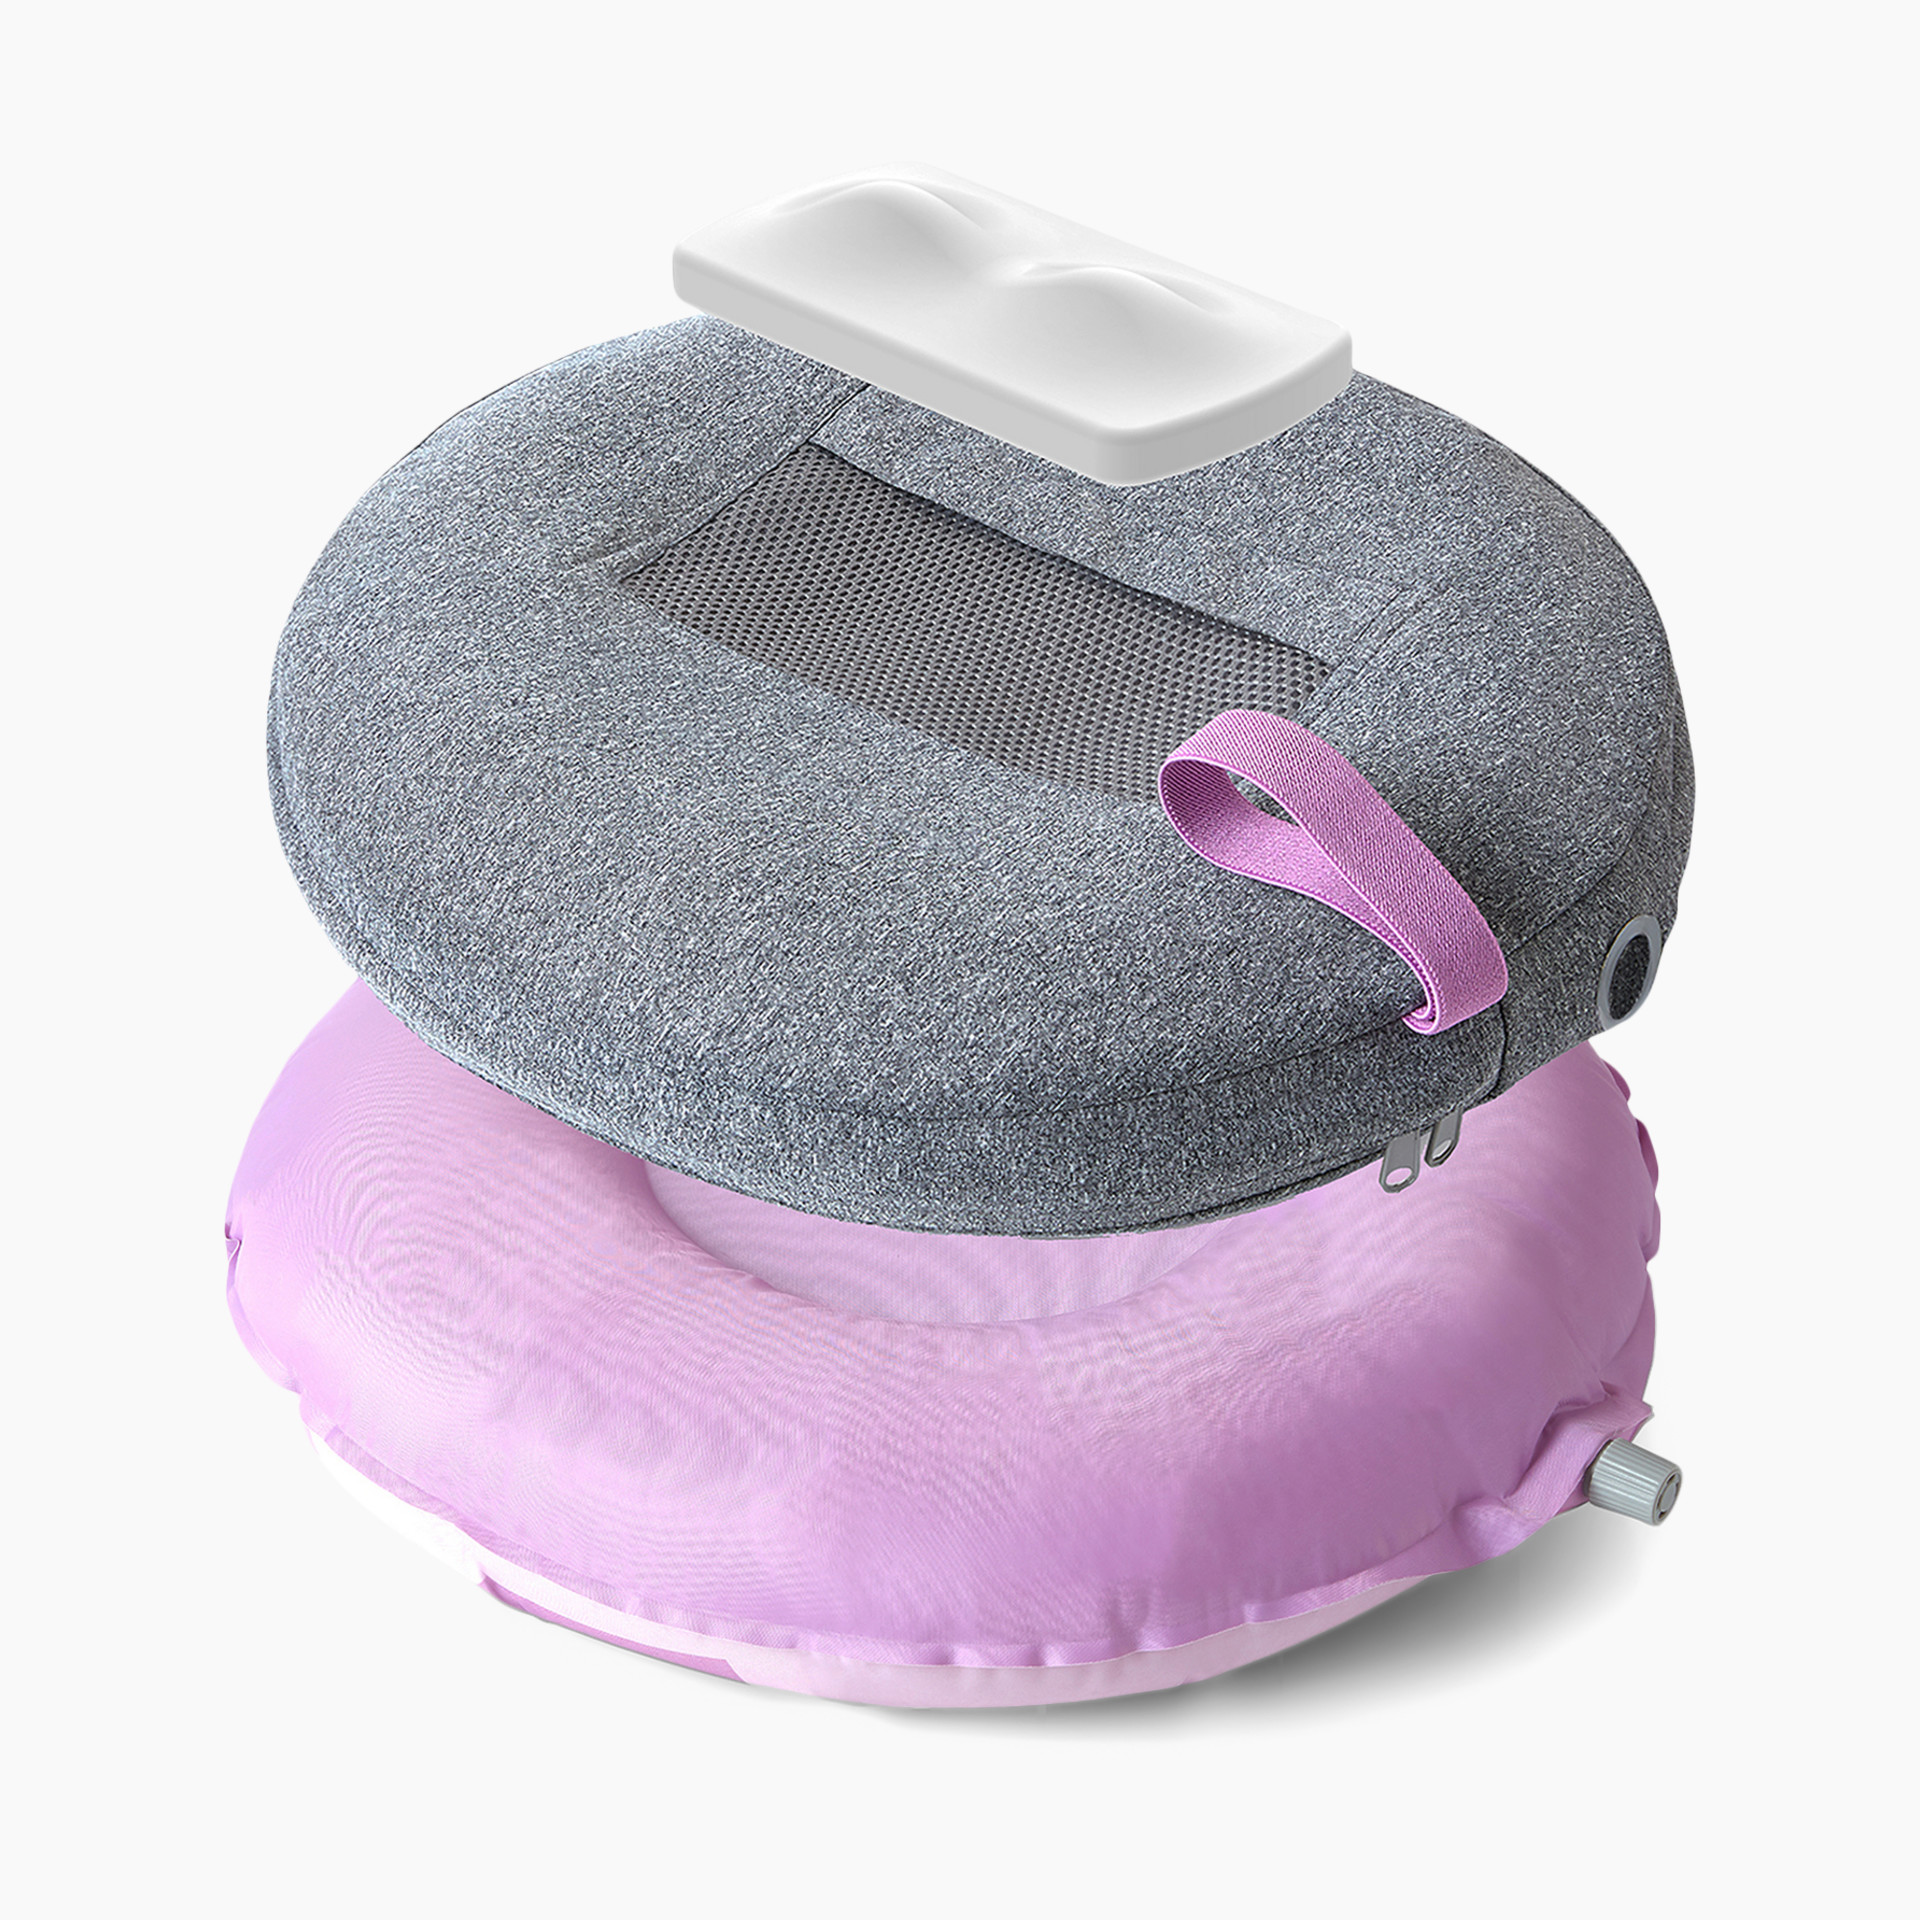 FRIDAMOM PERINEAL COOLING COMFORT CUSHION - Ready Set Baby